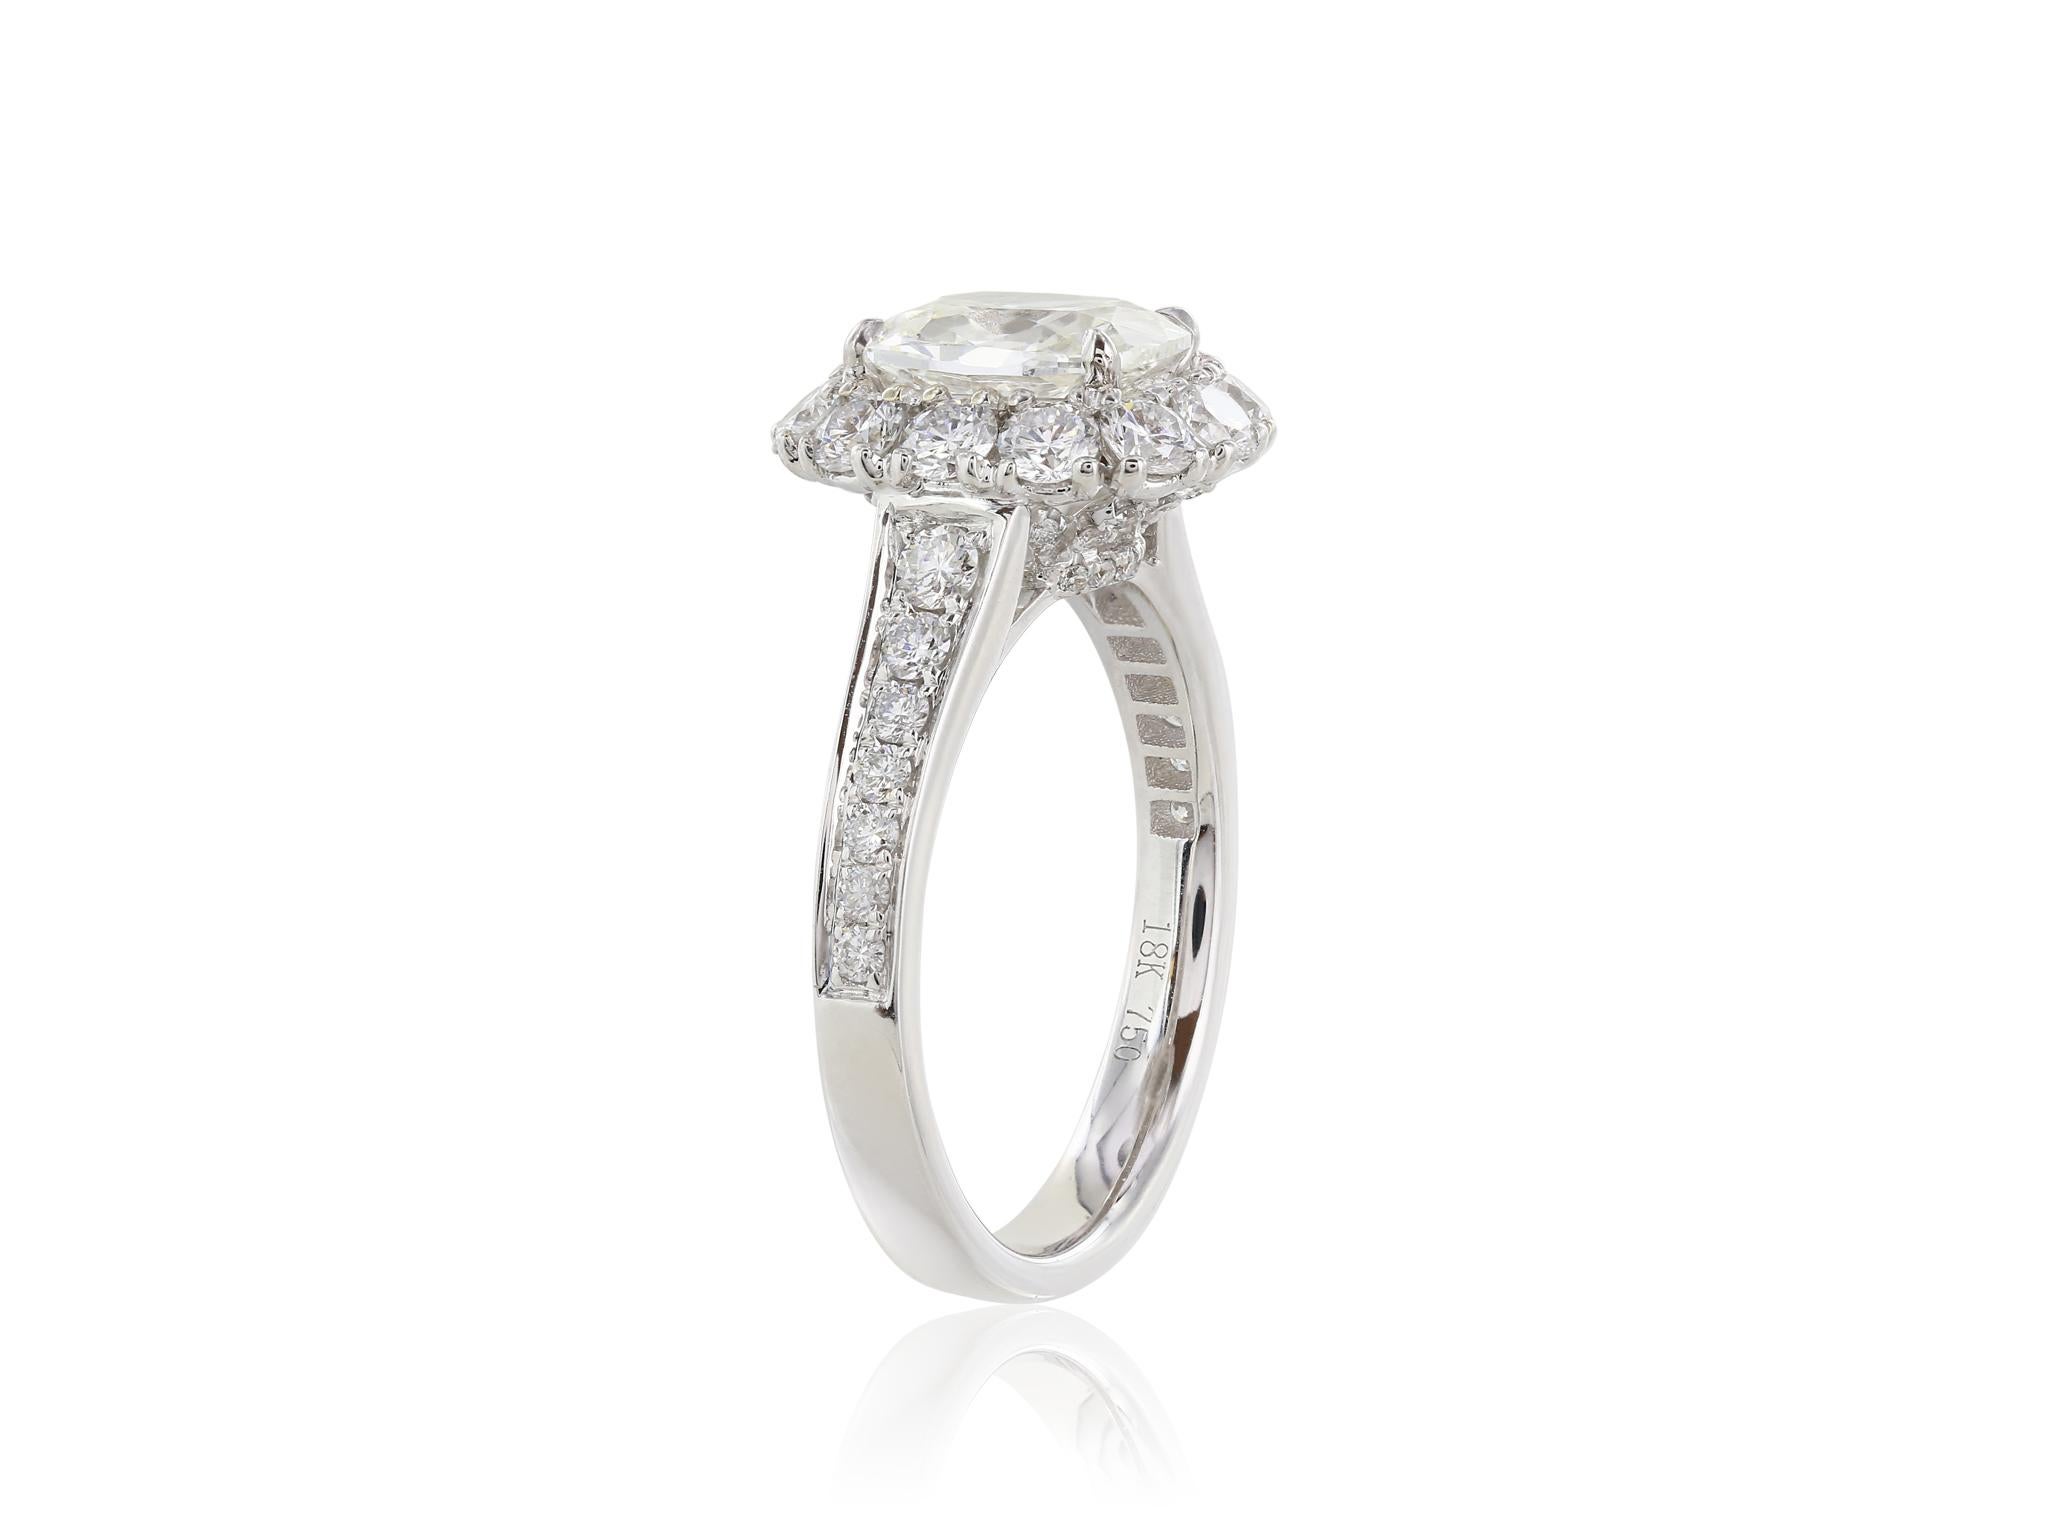 18 karat white gold ring consisting of 1 cushion cut diamond weighing 1.40 carats with a color and clarity of G/VS1 respectively set in a halo setting with round brilliant diamonds weighing 1.14 carats.